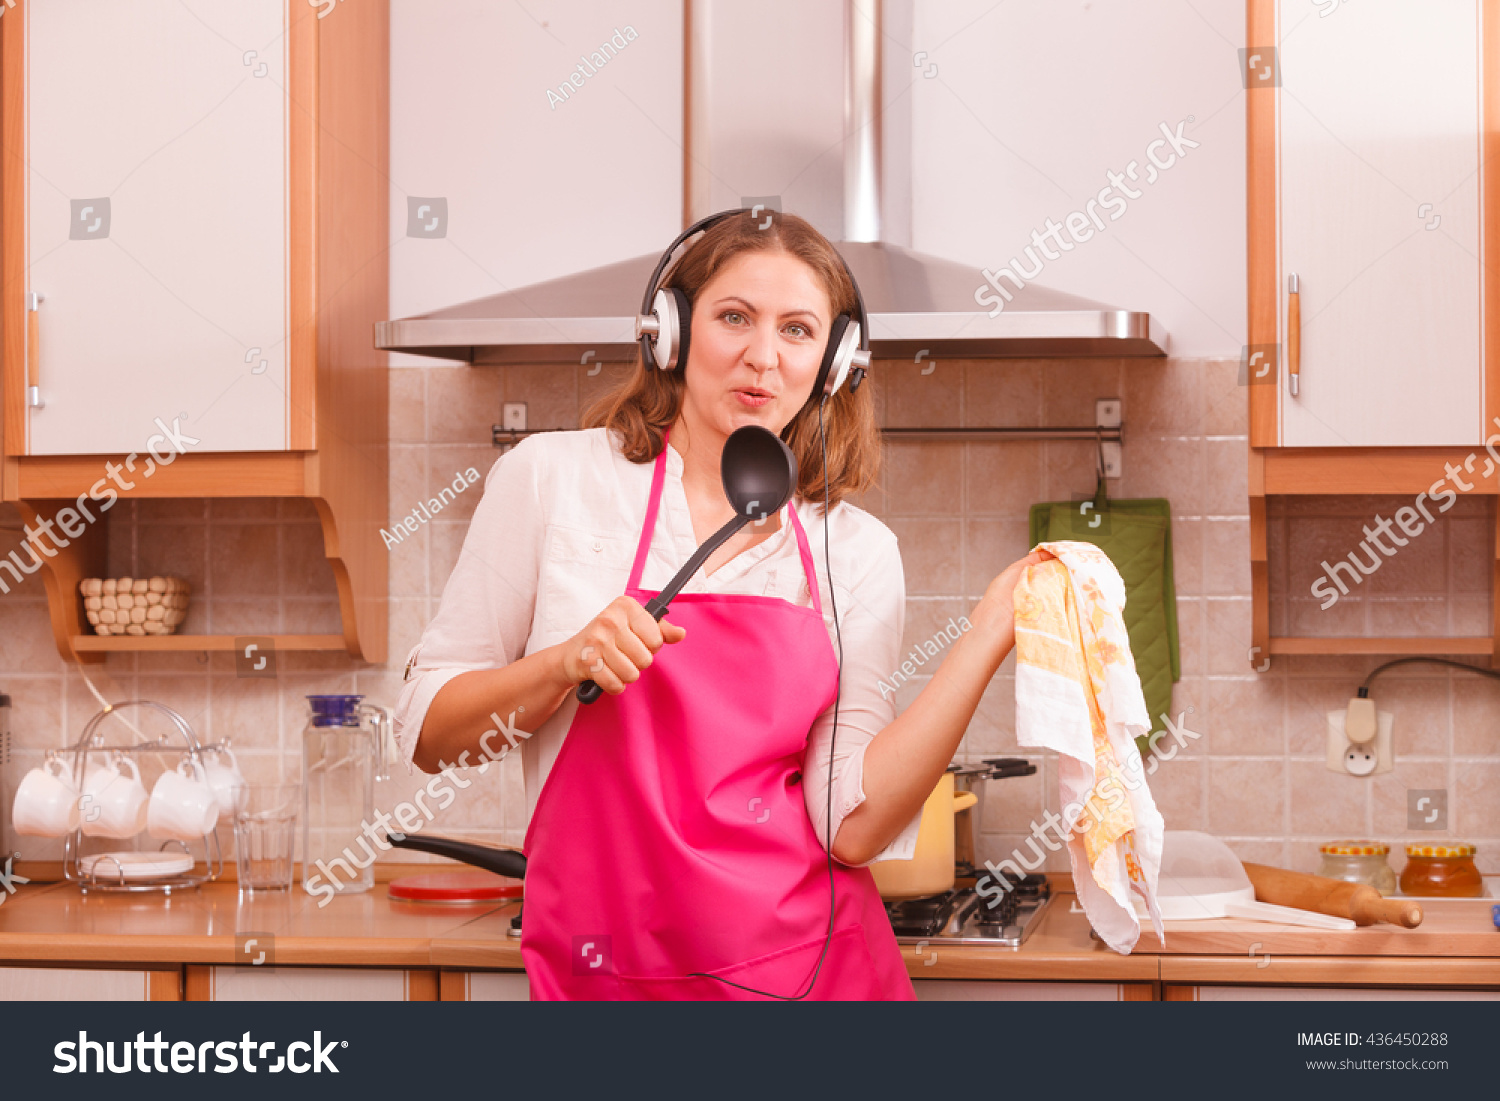 Young Woman Cooking And Wearing Apron In The Kitchen Stock 